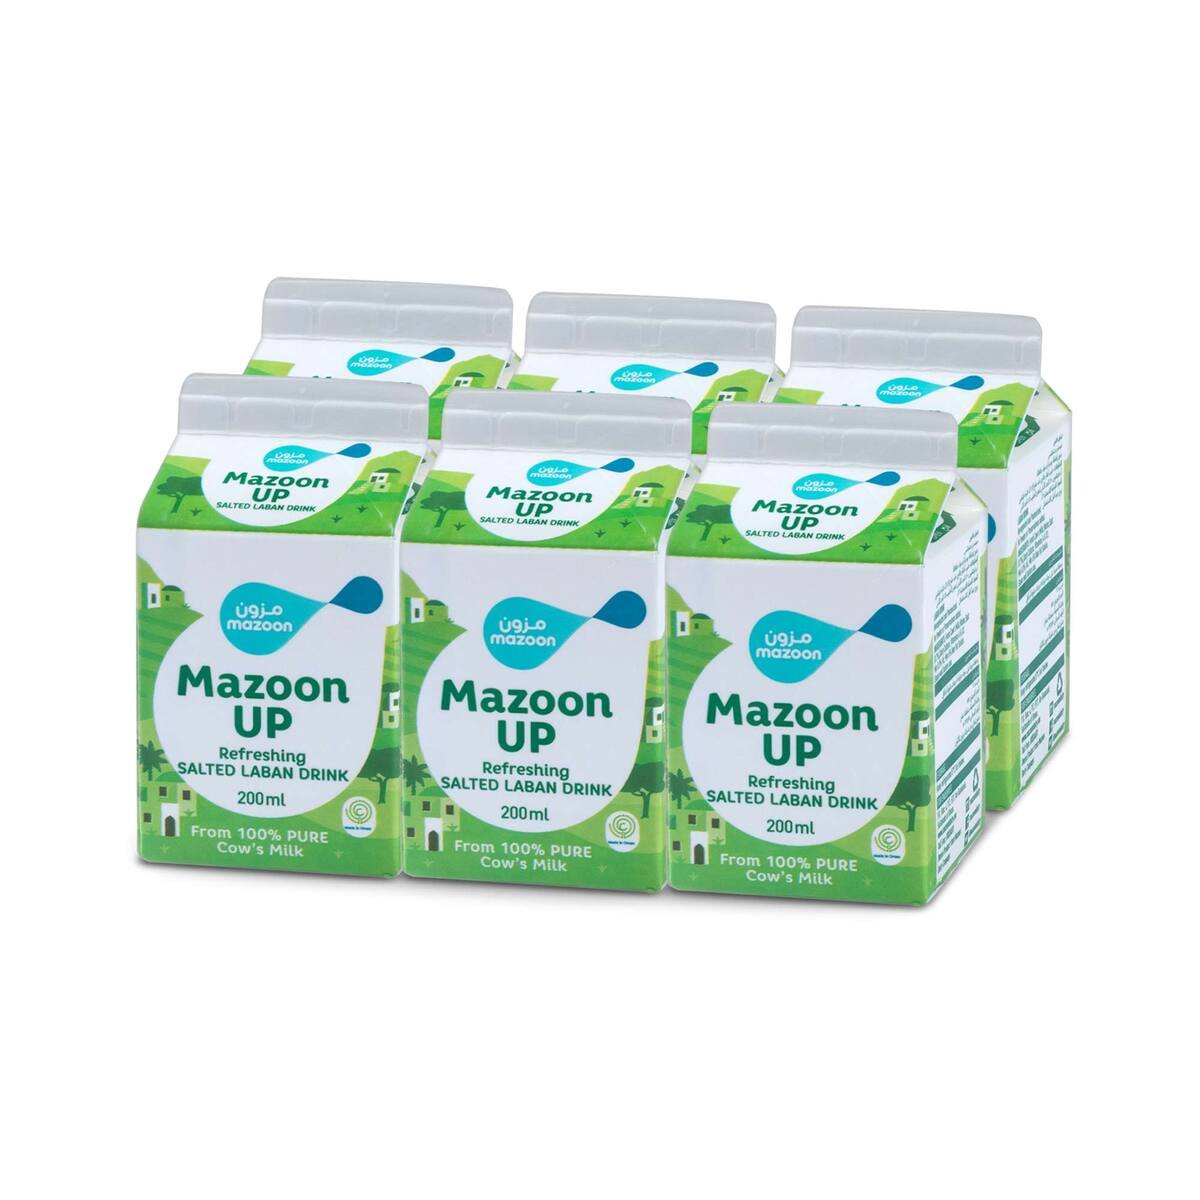 Mazoon Up Refreshing Salted Laban Drink 200ml